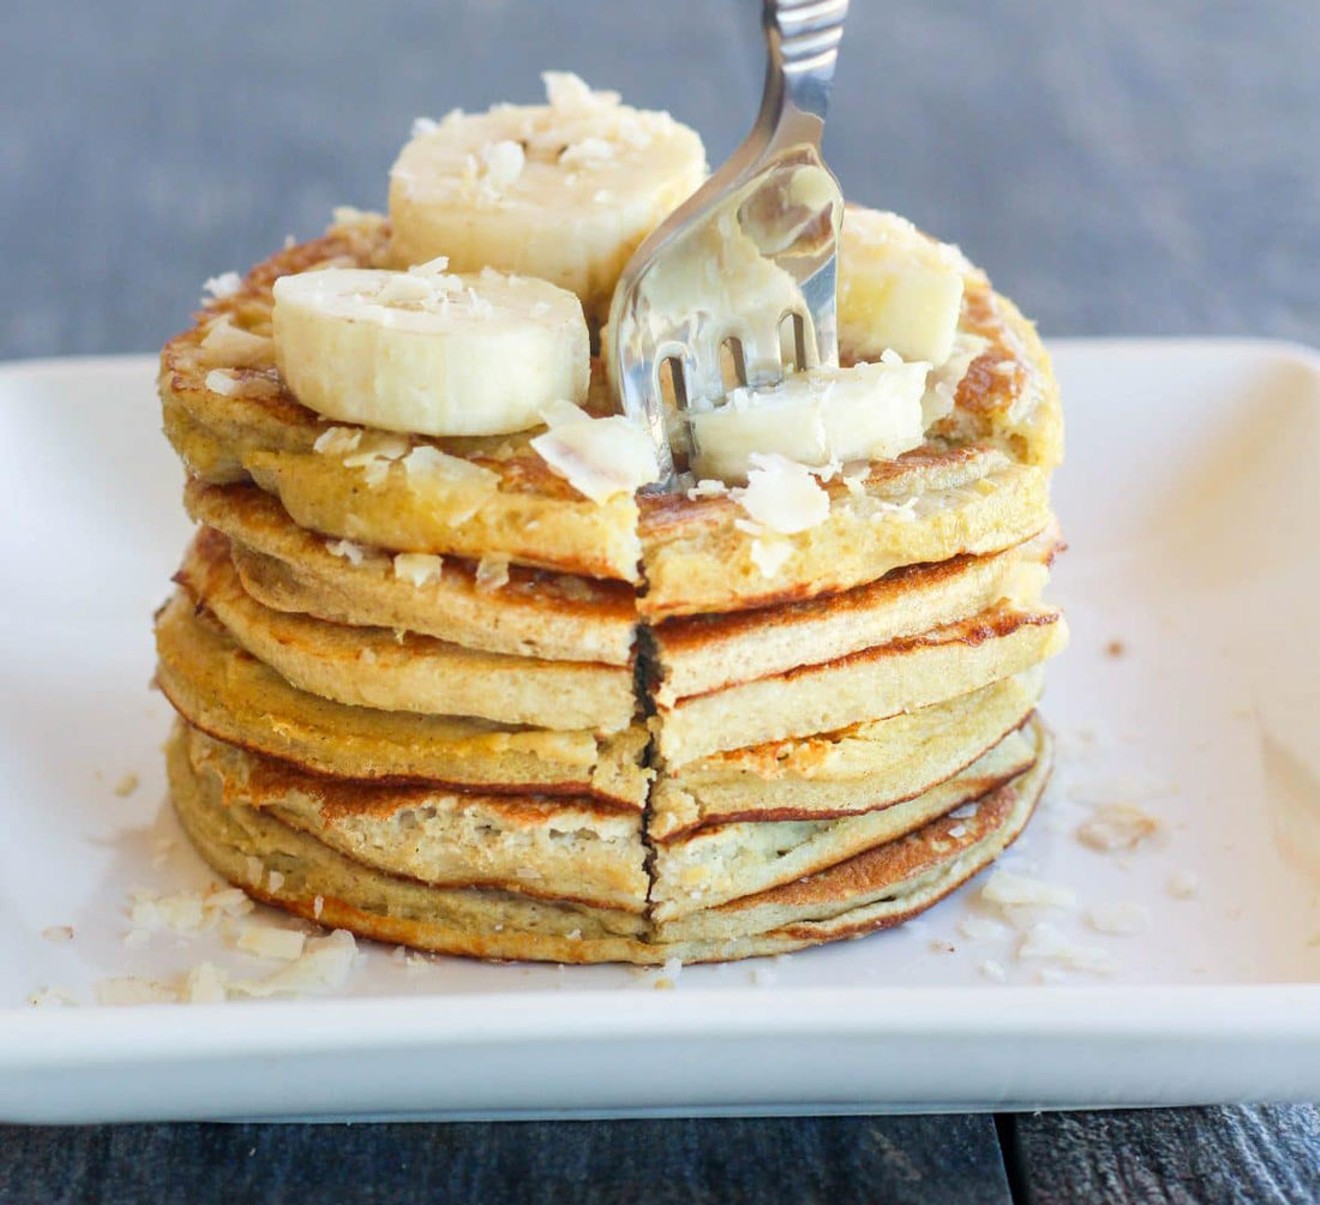 The coconut flour pancakes from Hungry Hobby.